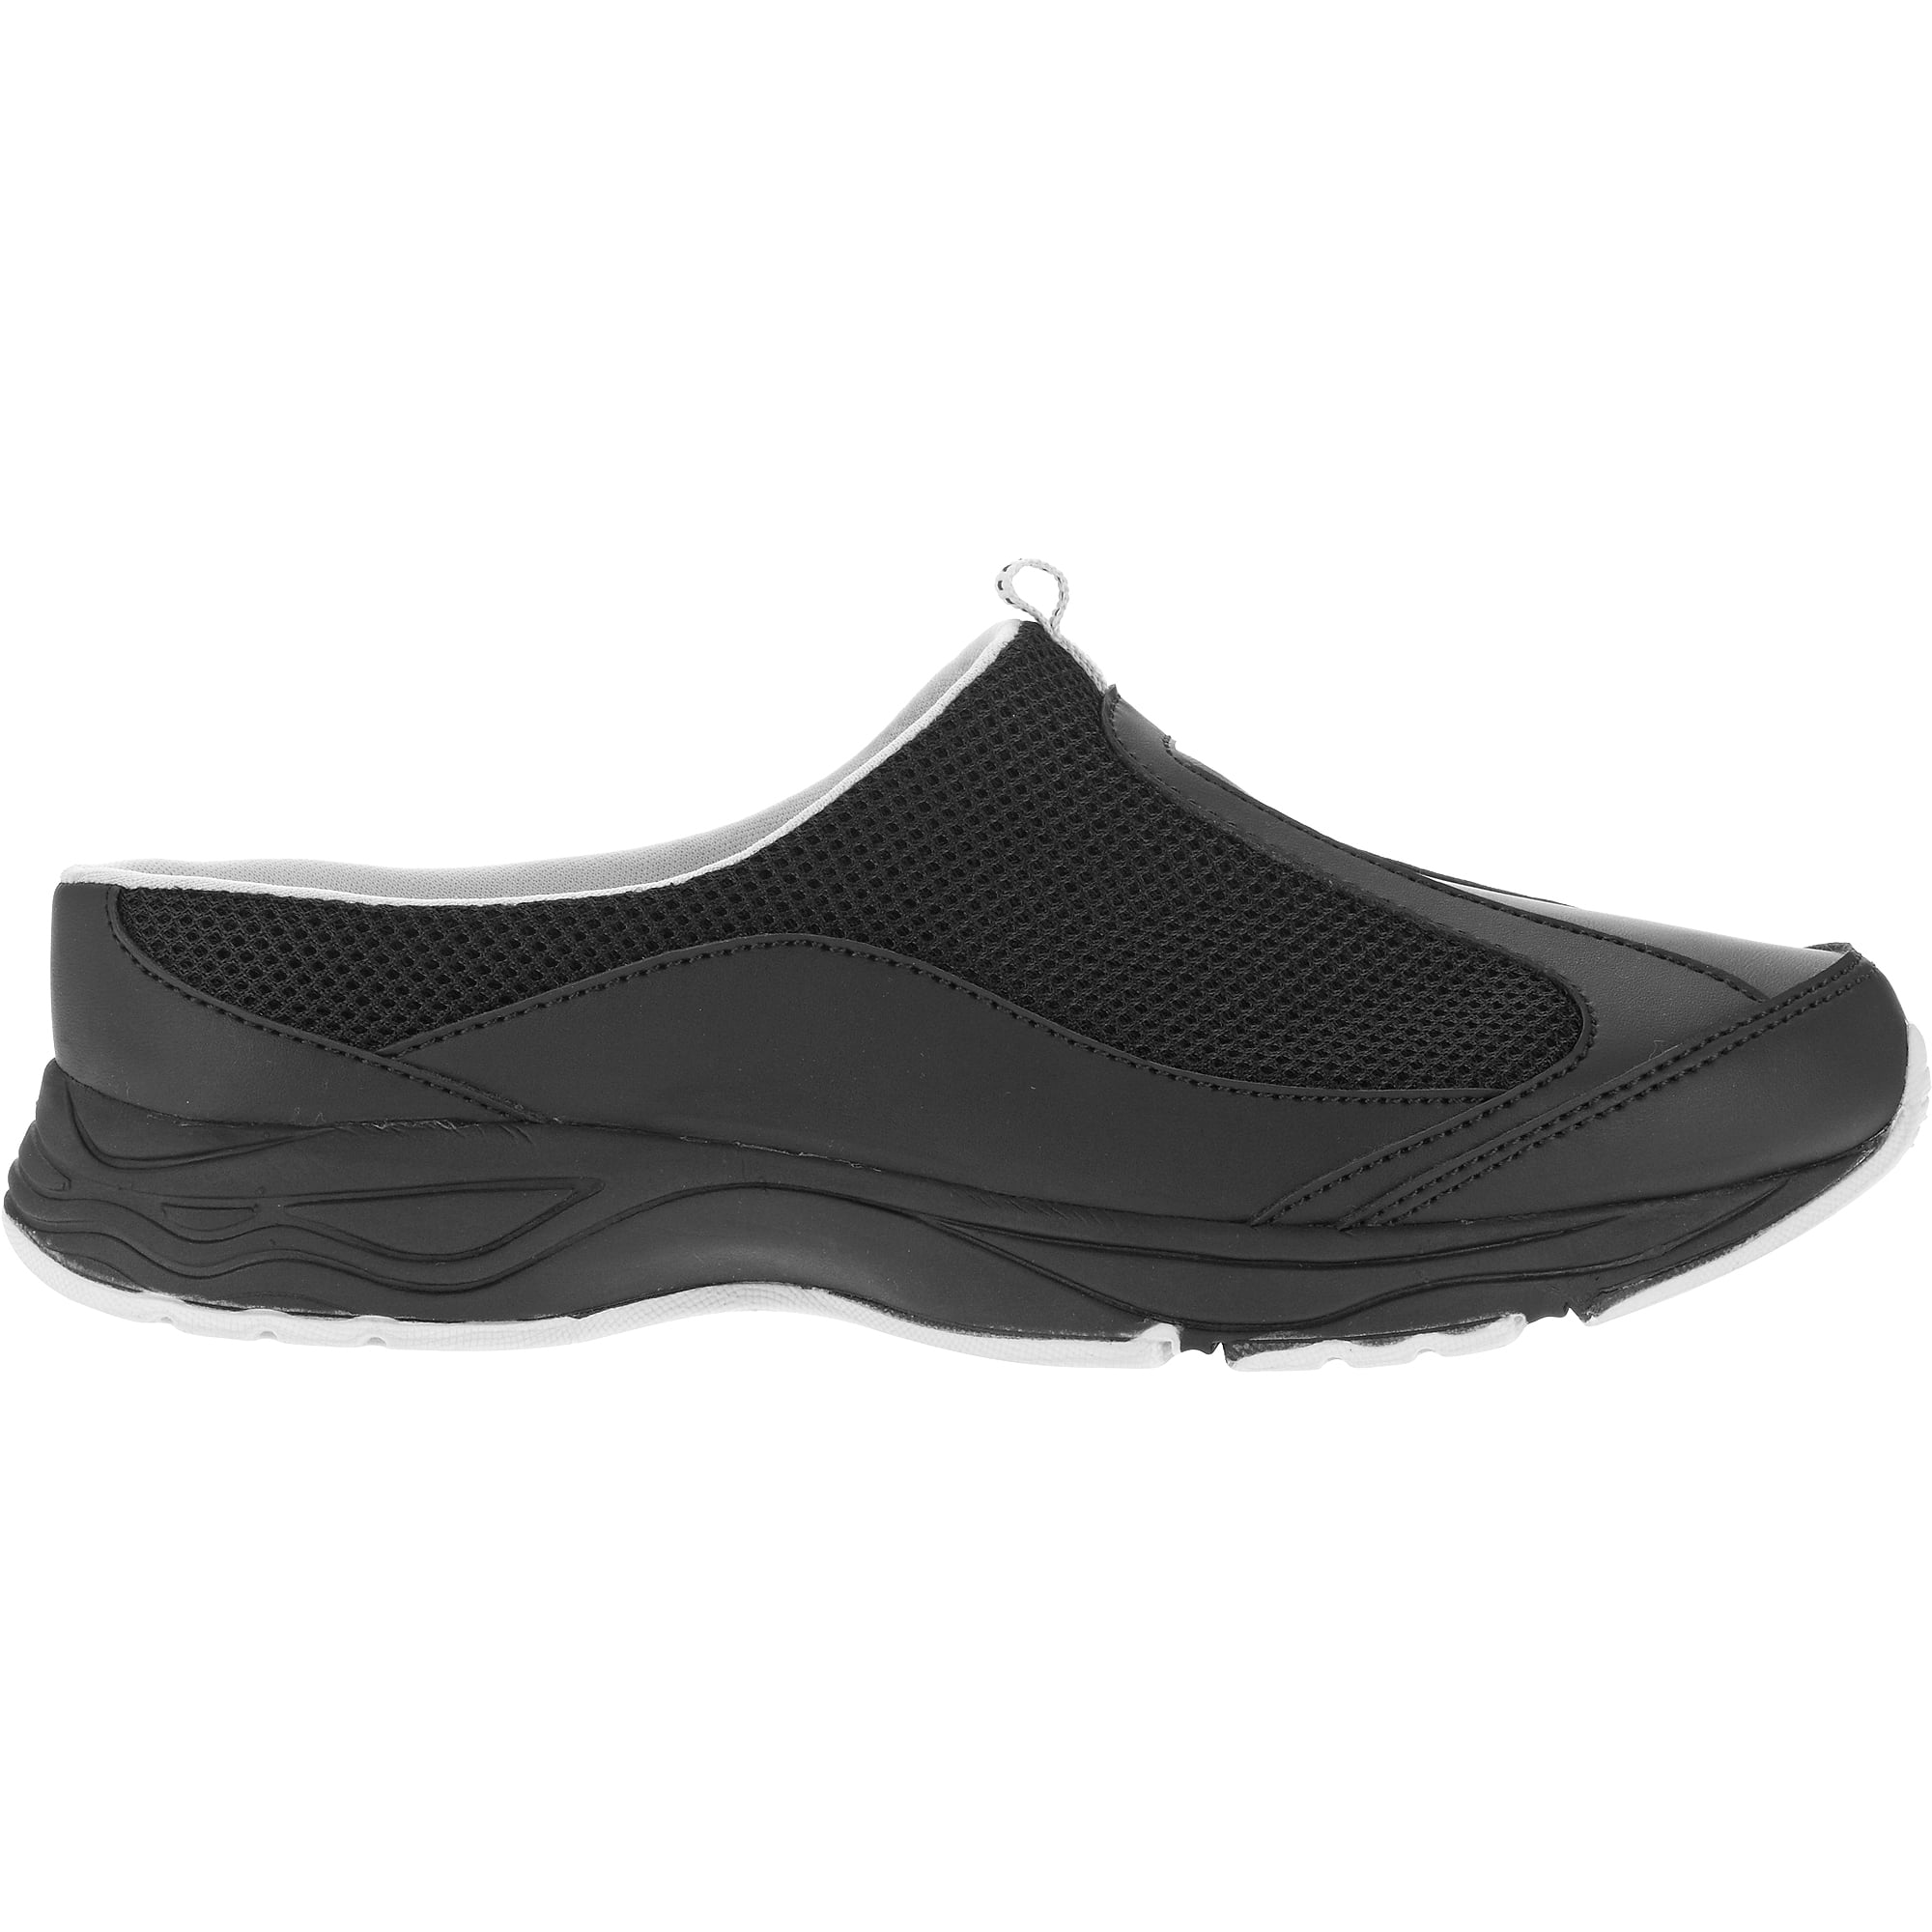 backless slip on tennis shoes